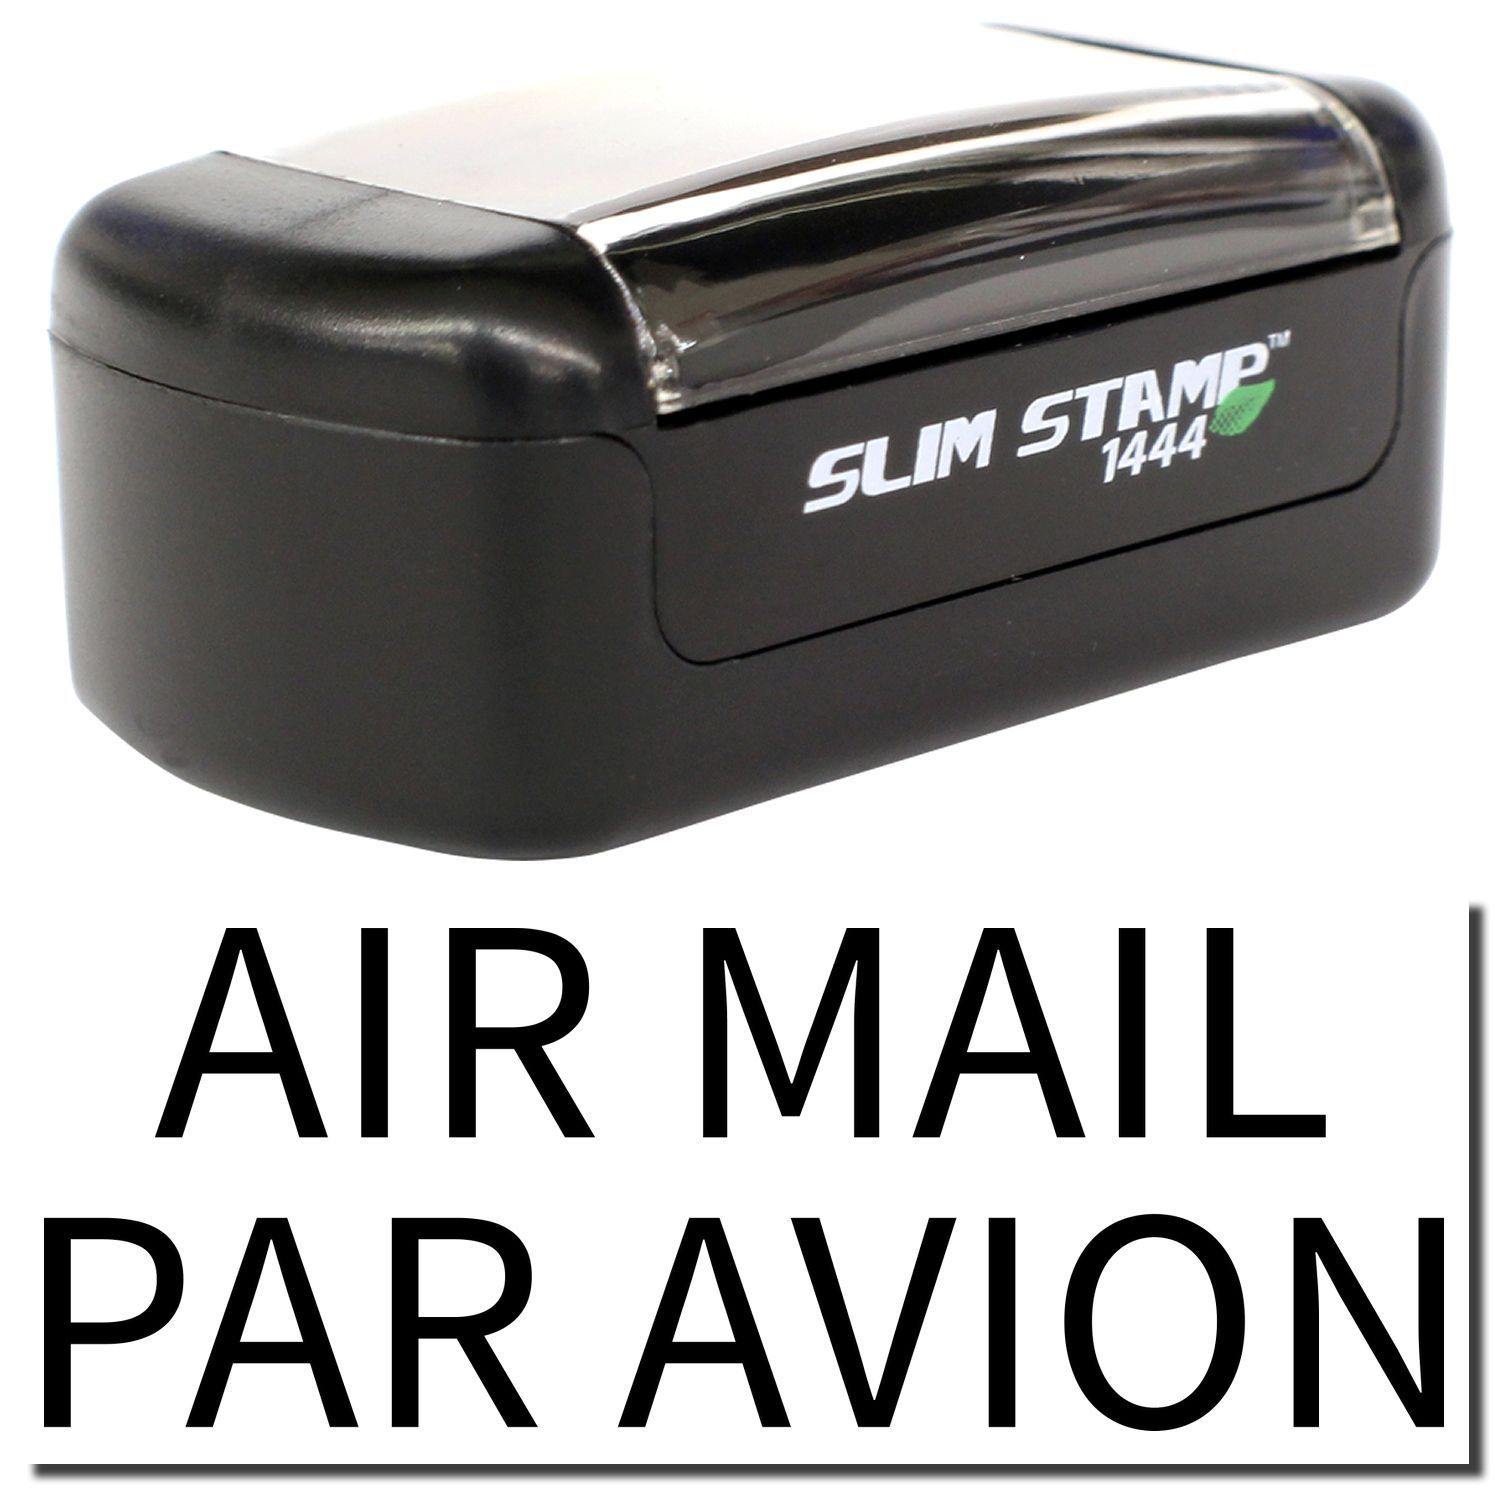 A stock office pre-inked stamp with a stamped image showing how the text "AIR MAIL PAR AVION" is displayed after stamping.